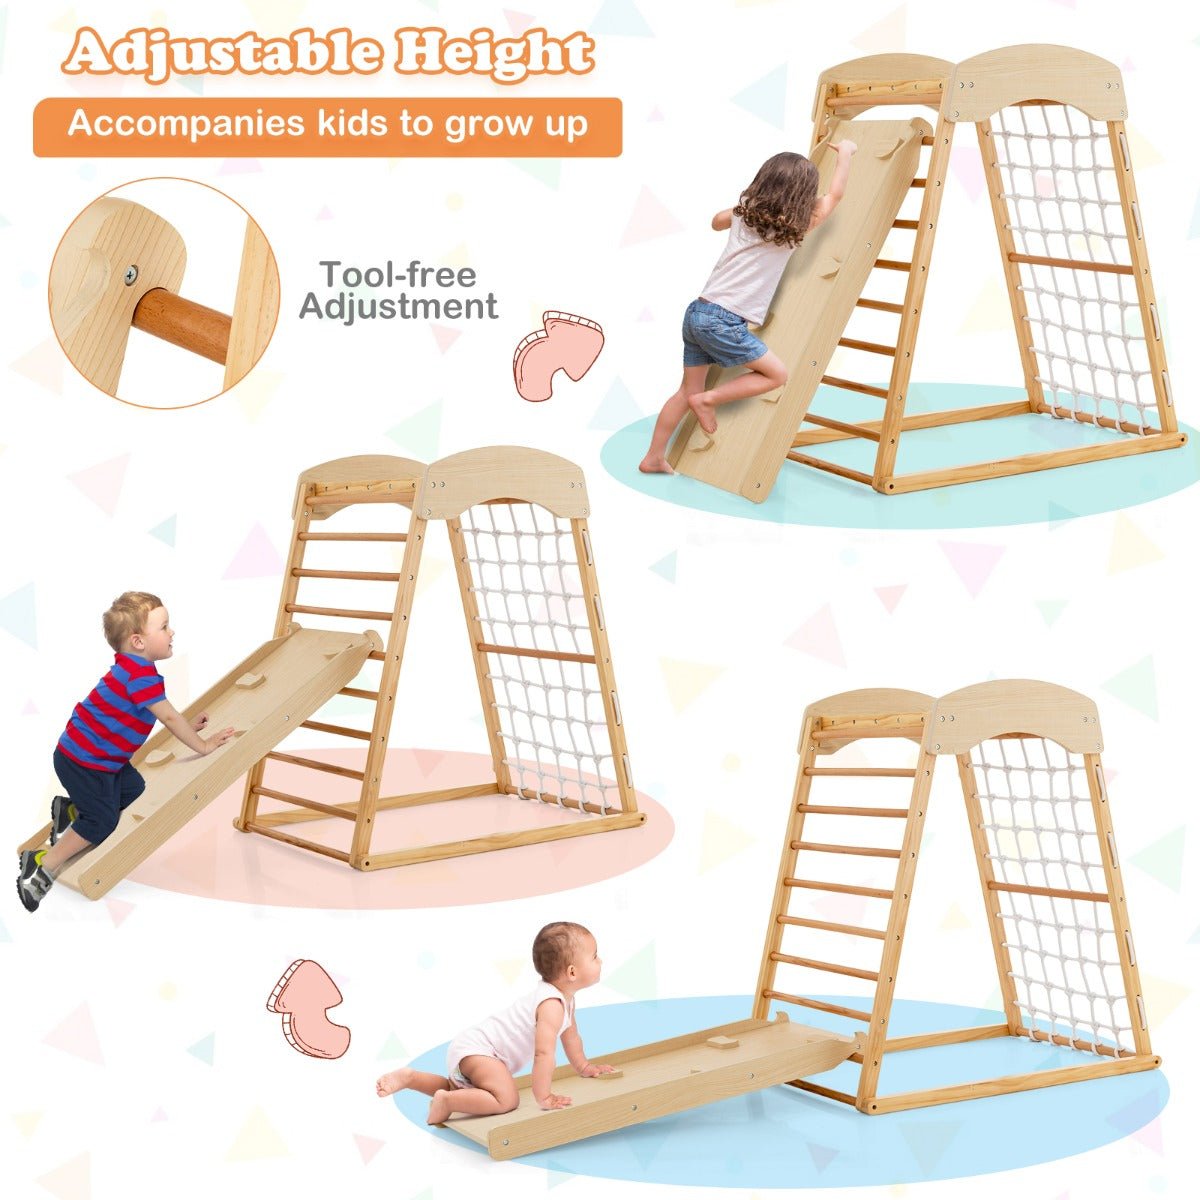 Versatile Play Gym with Climbing and Sliding Options